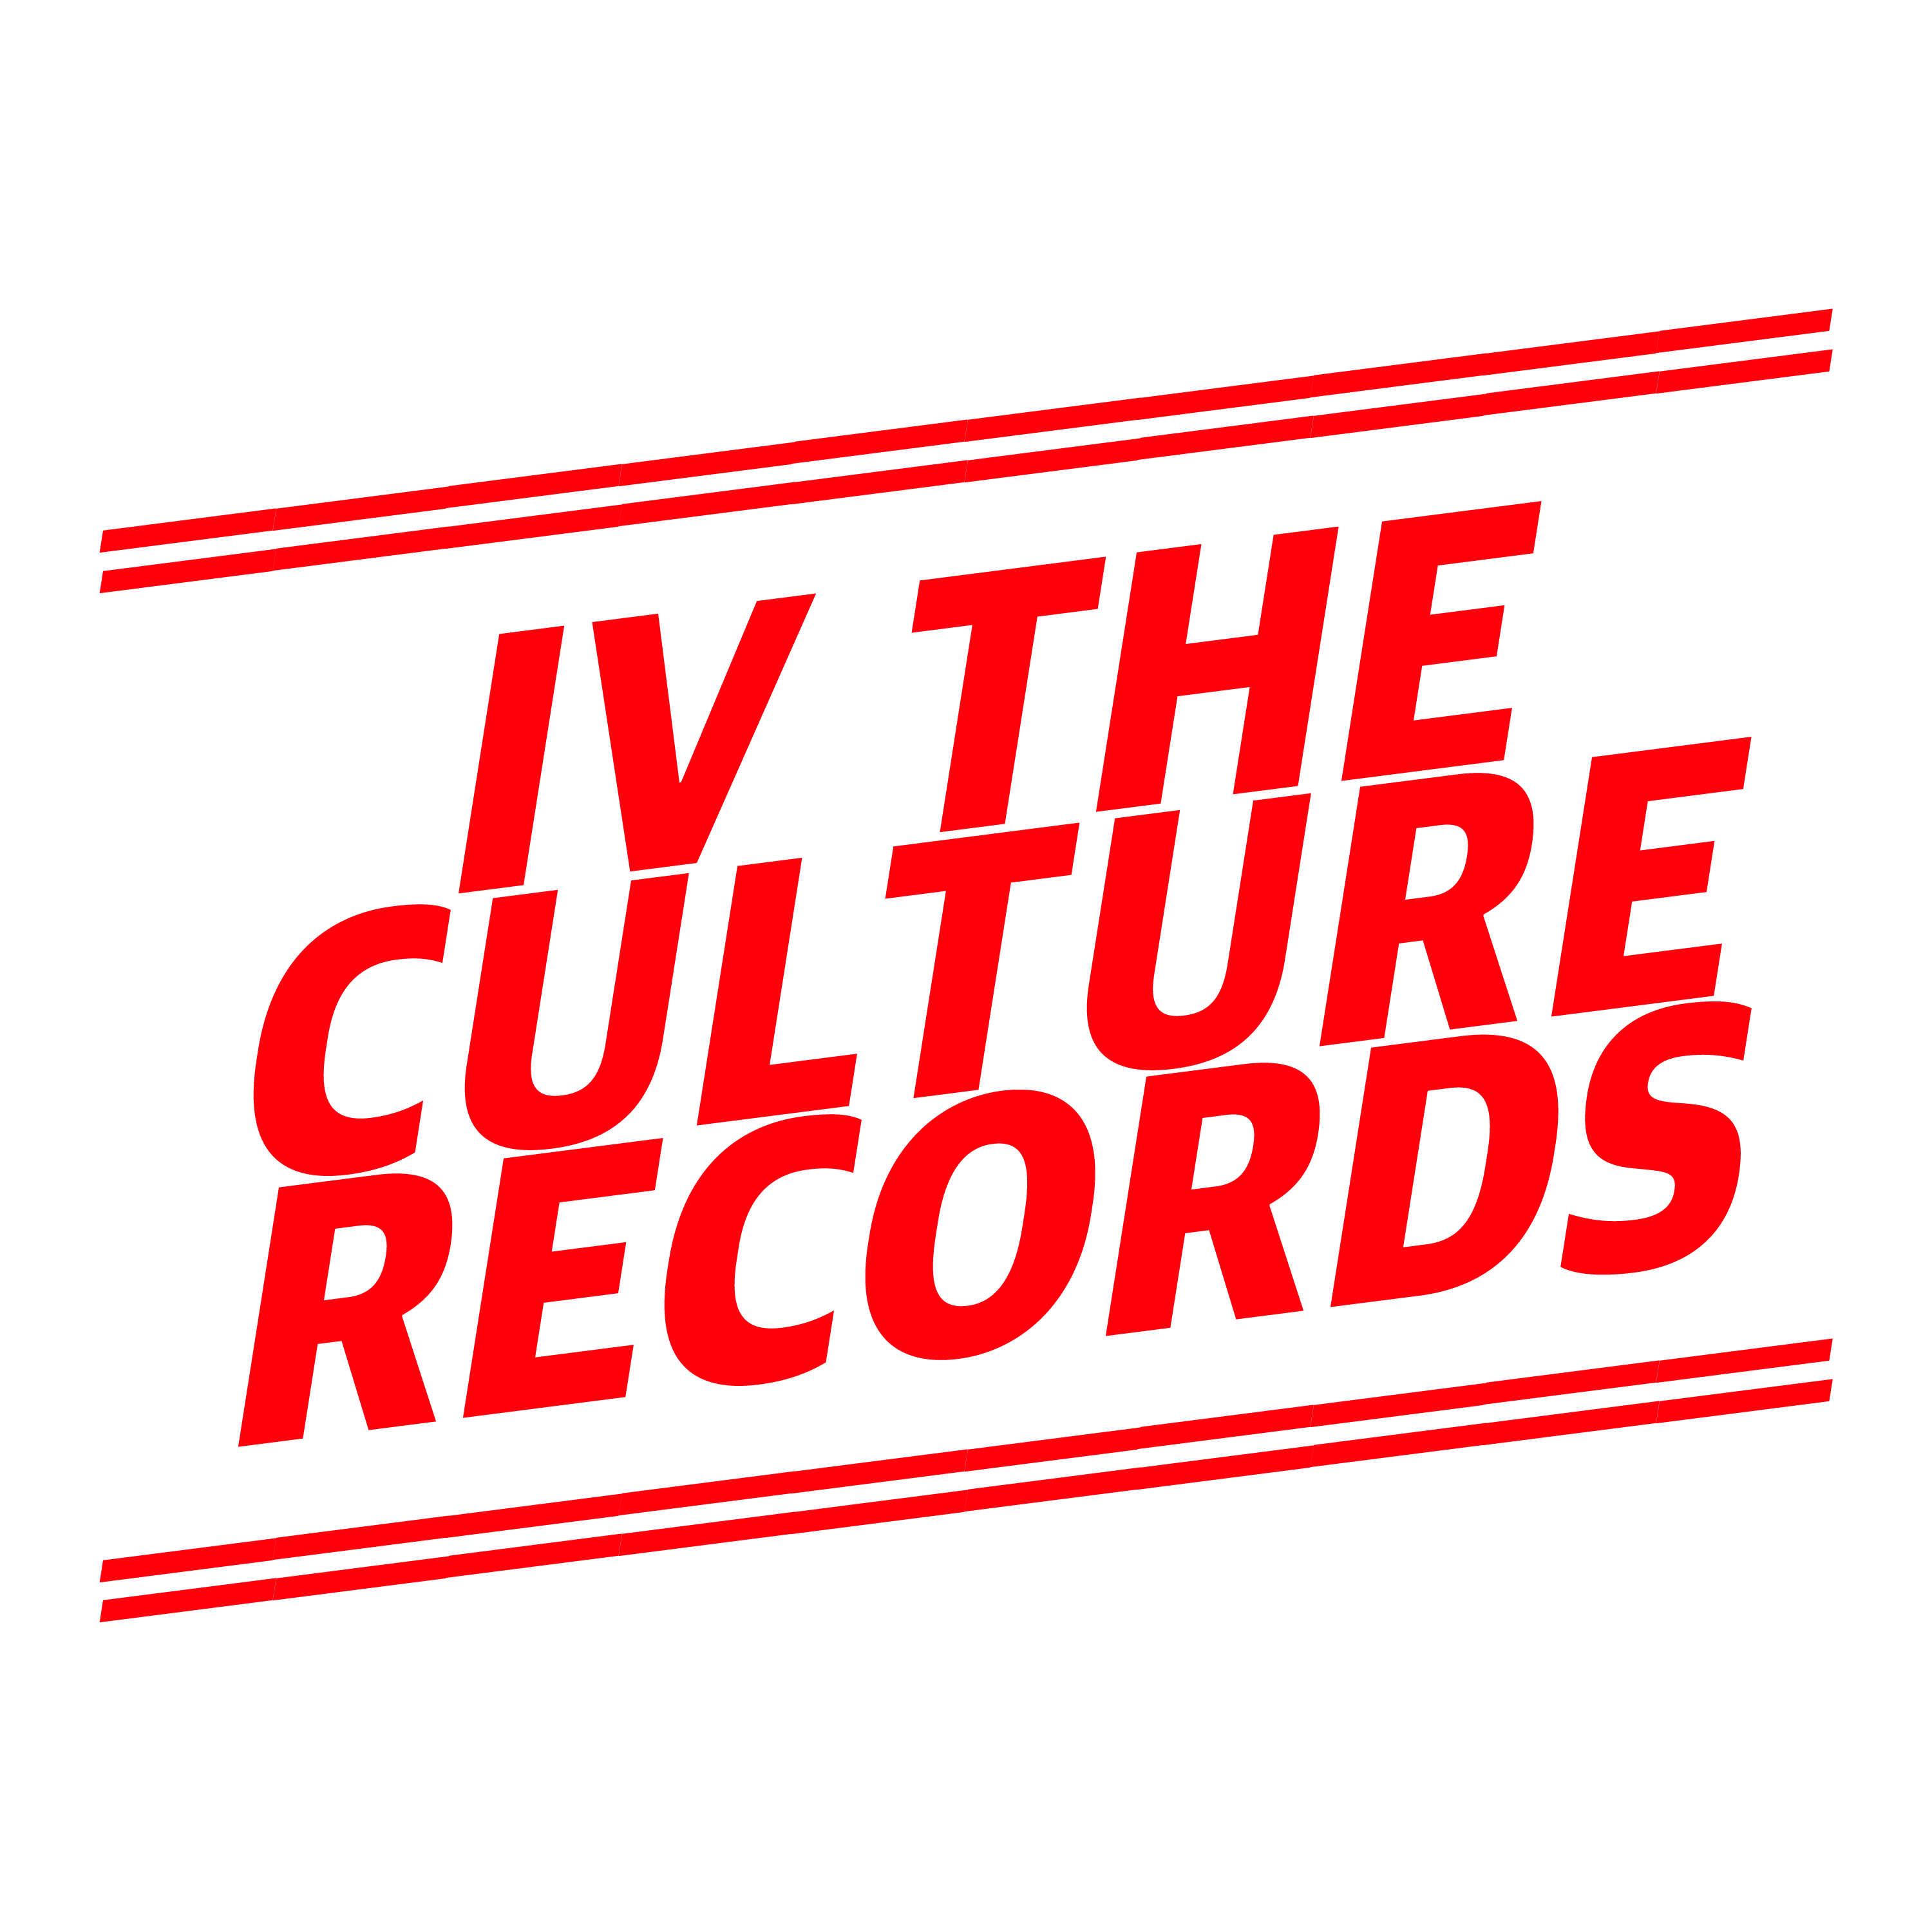 IV the culture records sub label Ghost rec and Shap Recordings